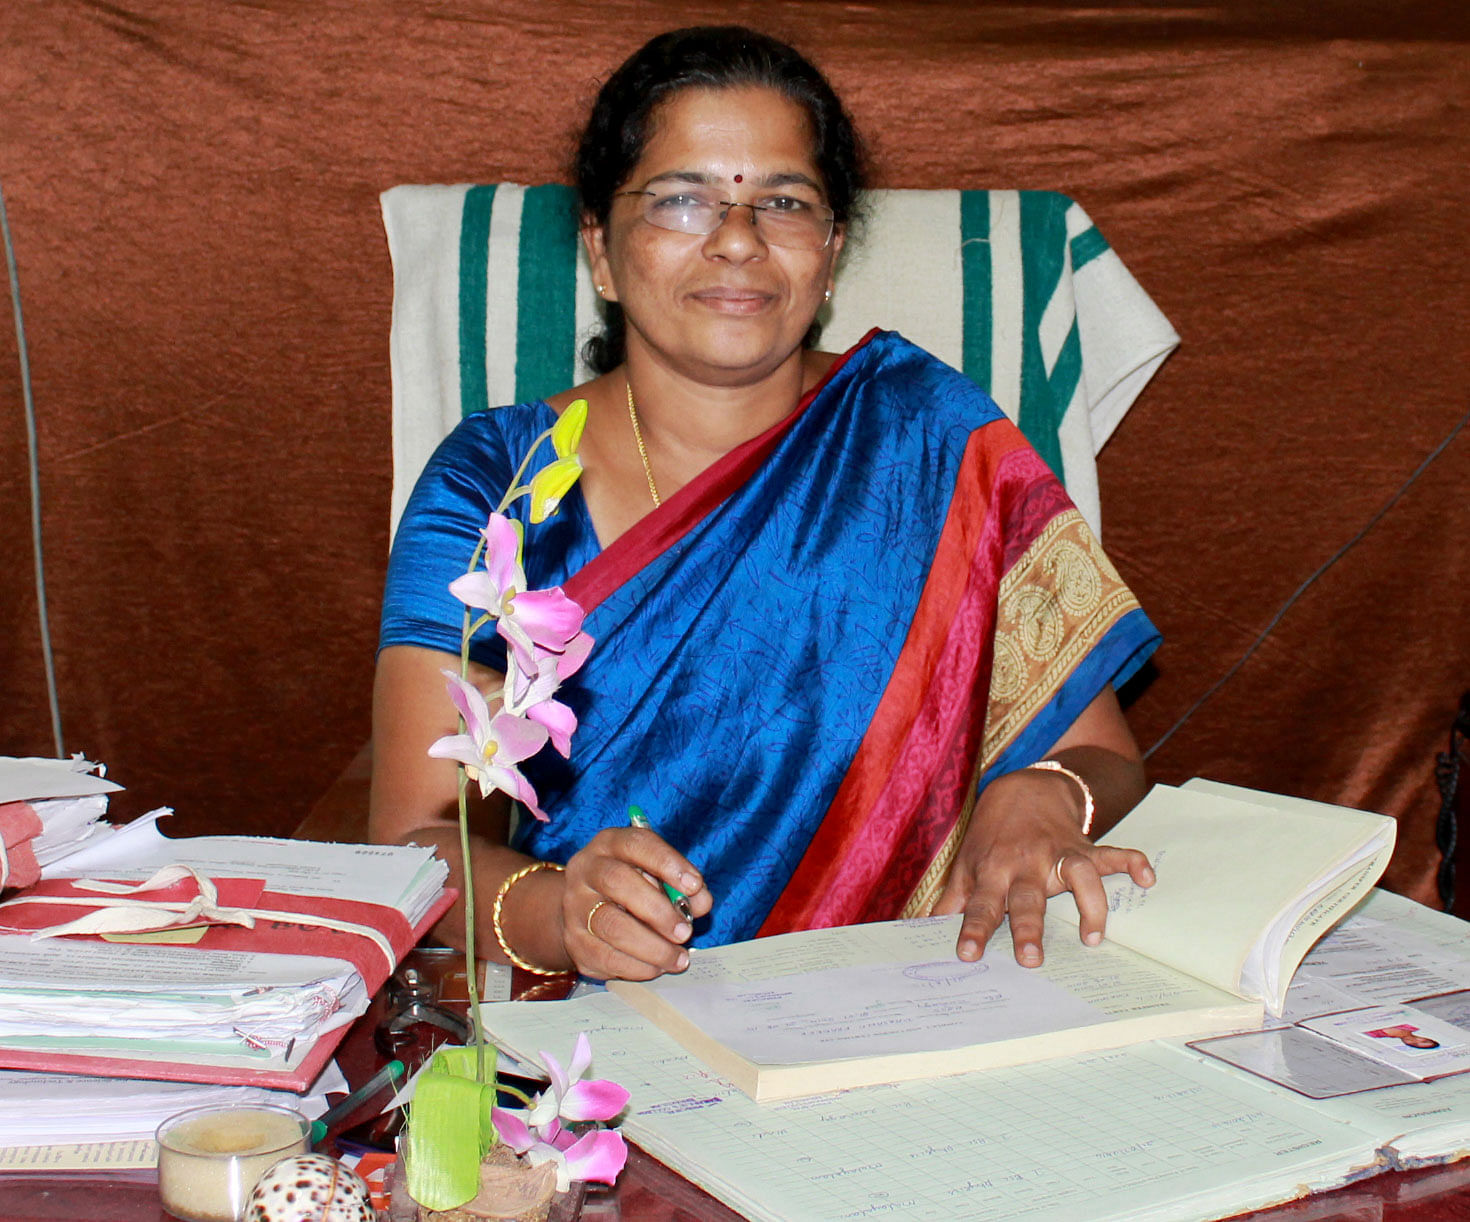 Professor NL Beena, Principal of Maharaja’s College Ernakulam, has drawn flak for her comments. (Photo Courtesy: <a href="https://www.maharajas.ac.in/administration/principal">Maharaja’s College</a>)